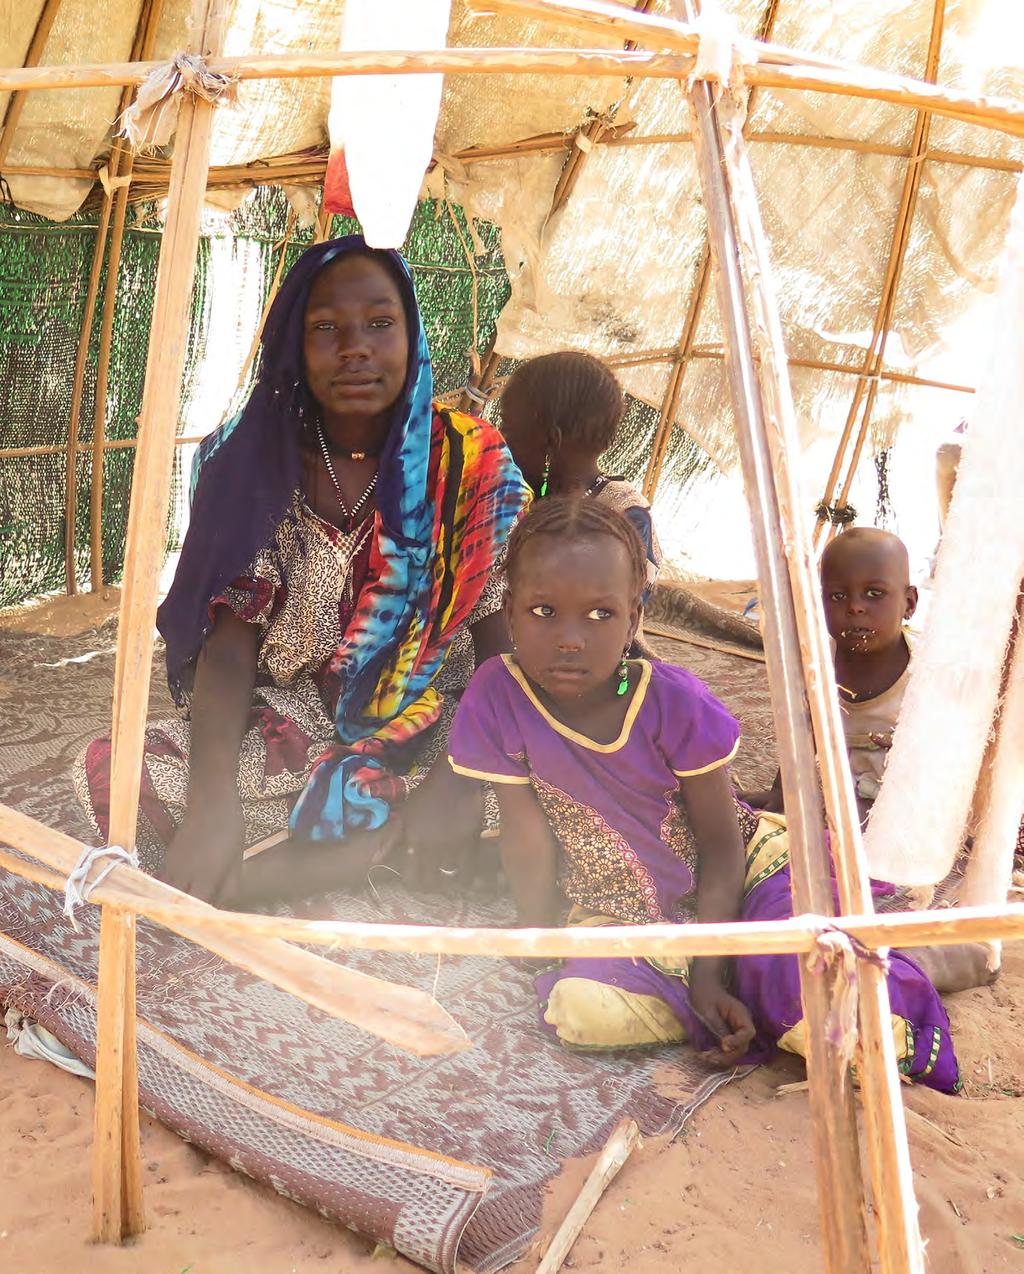 An internally displaced family located in